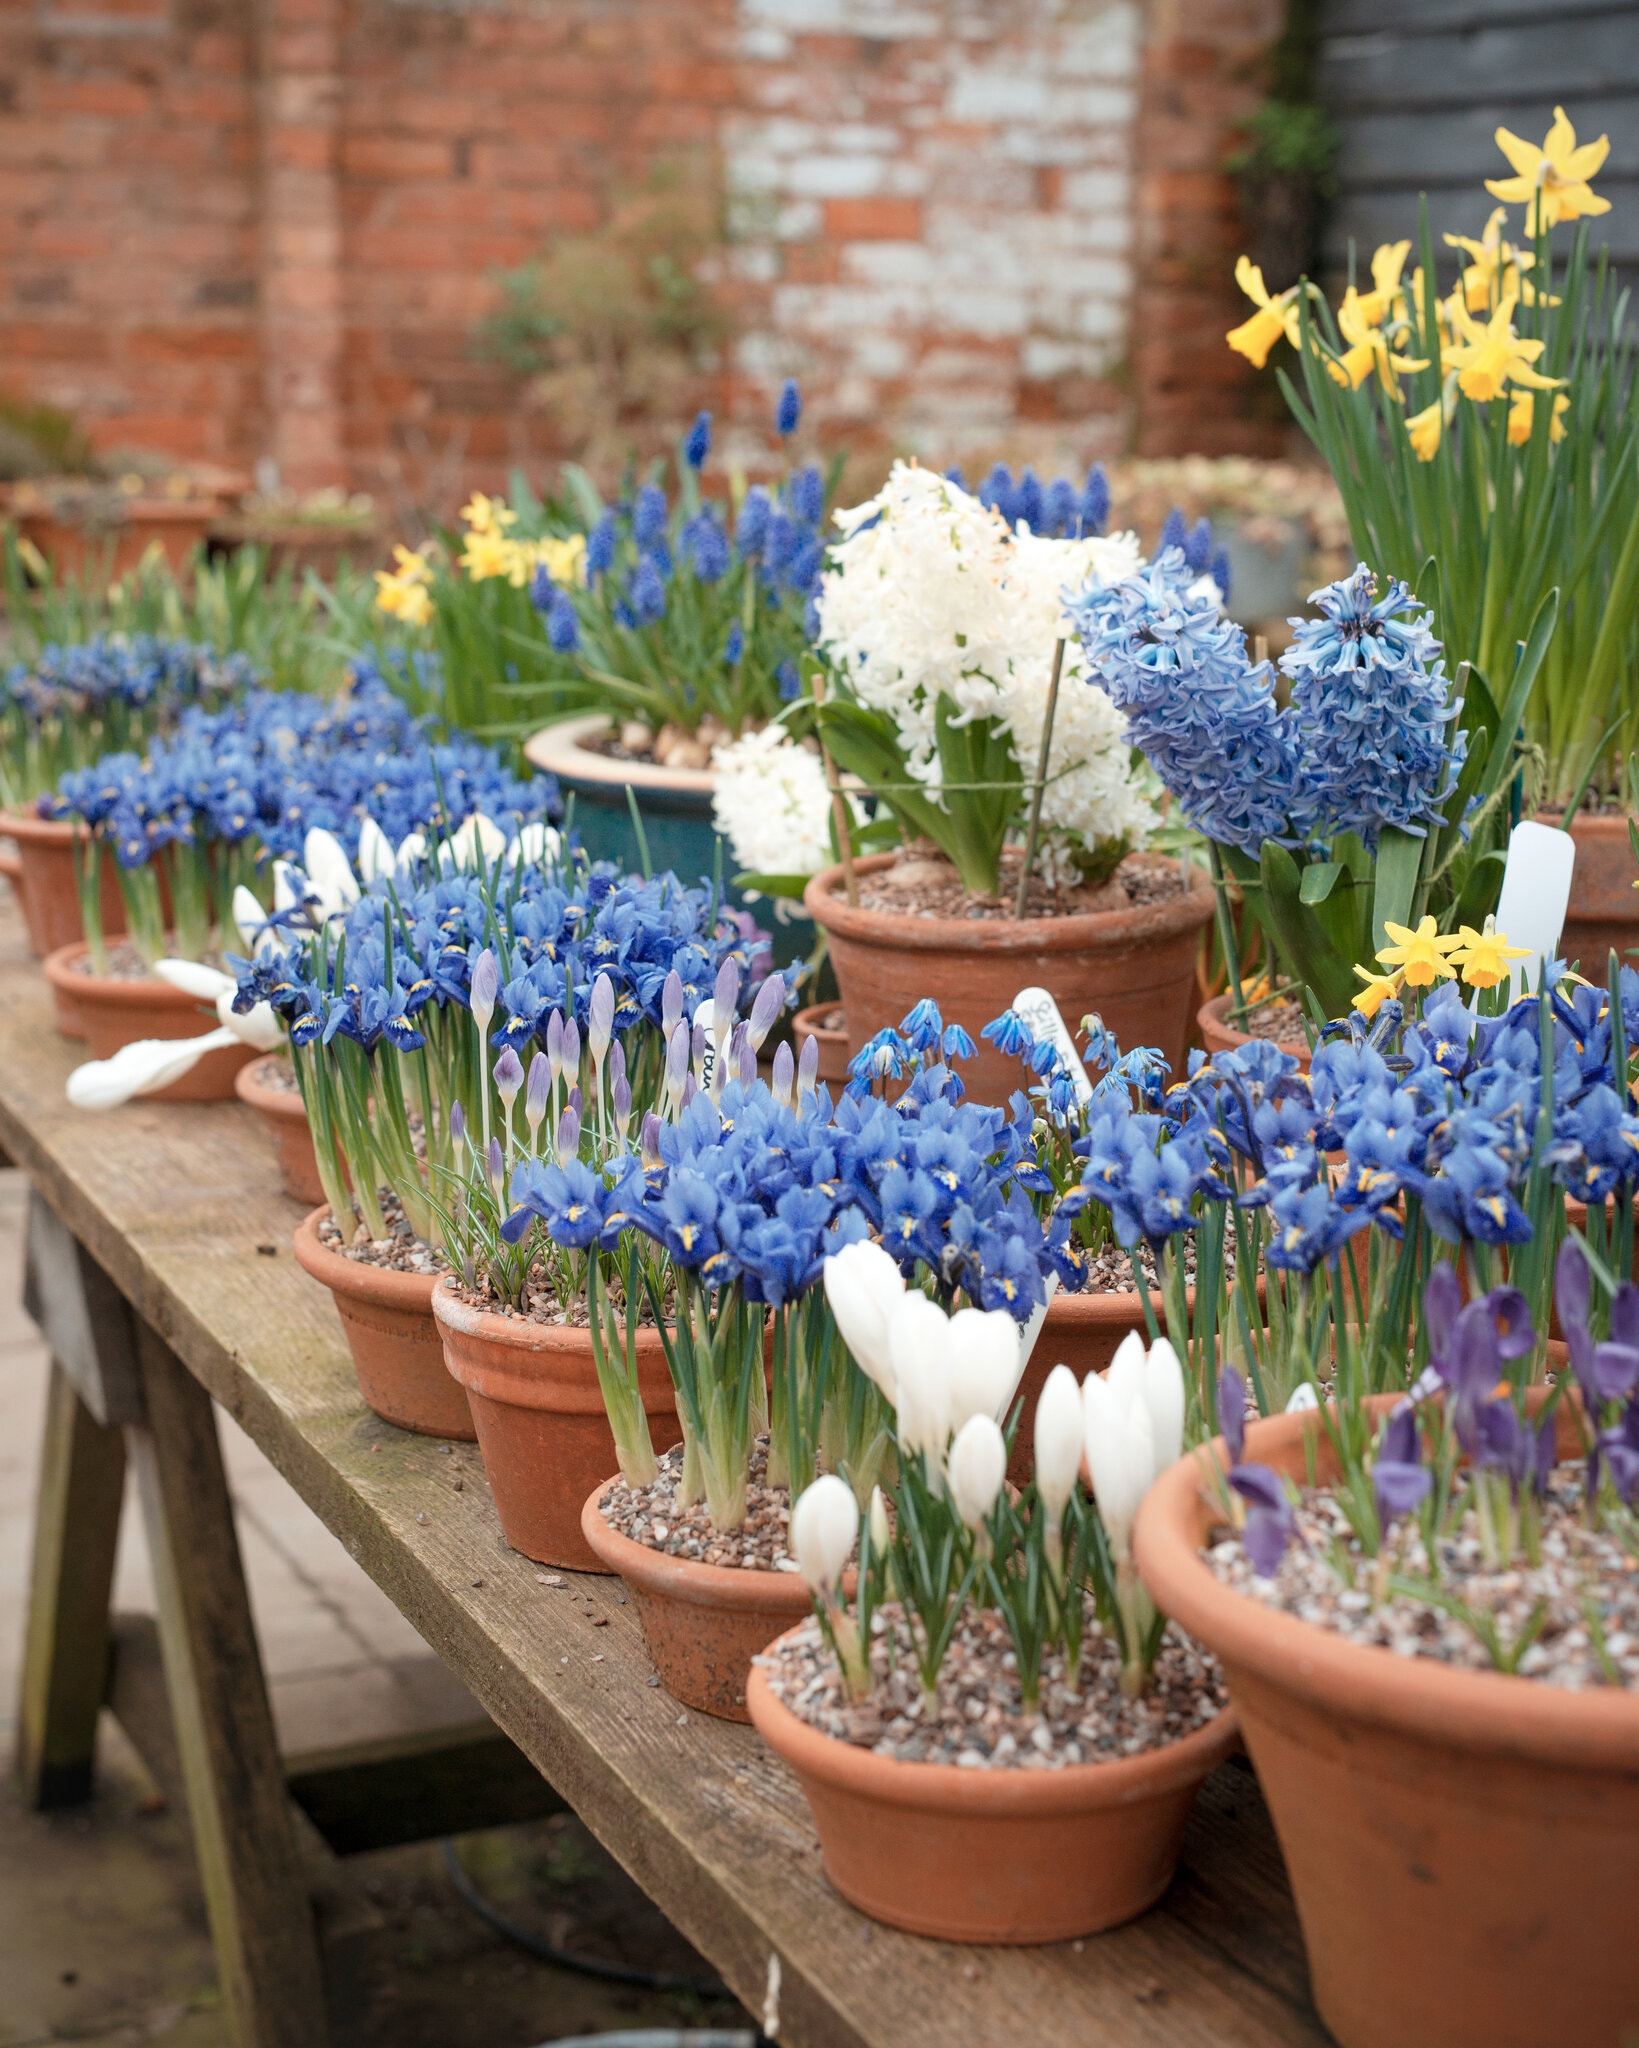 Irises, hyacinths and muscari in pots. Credit Francesca Jones for The New York Times